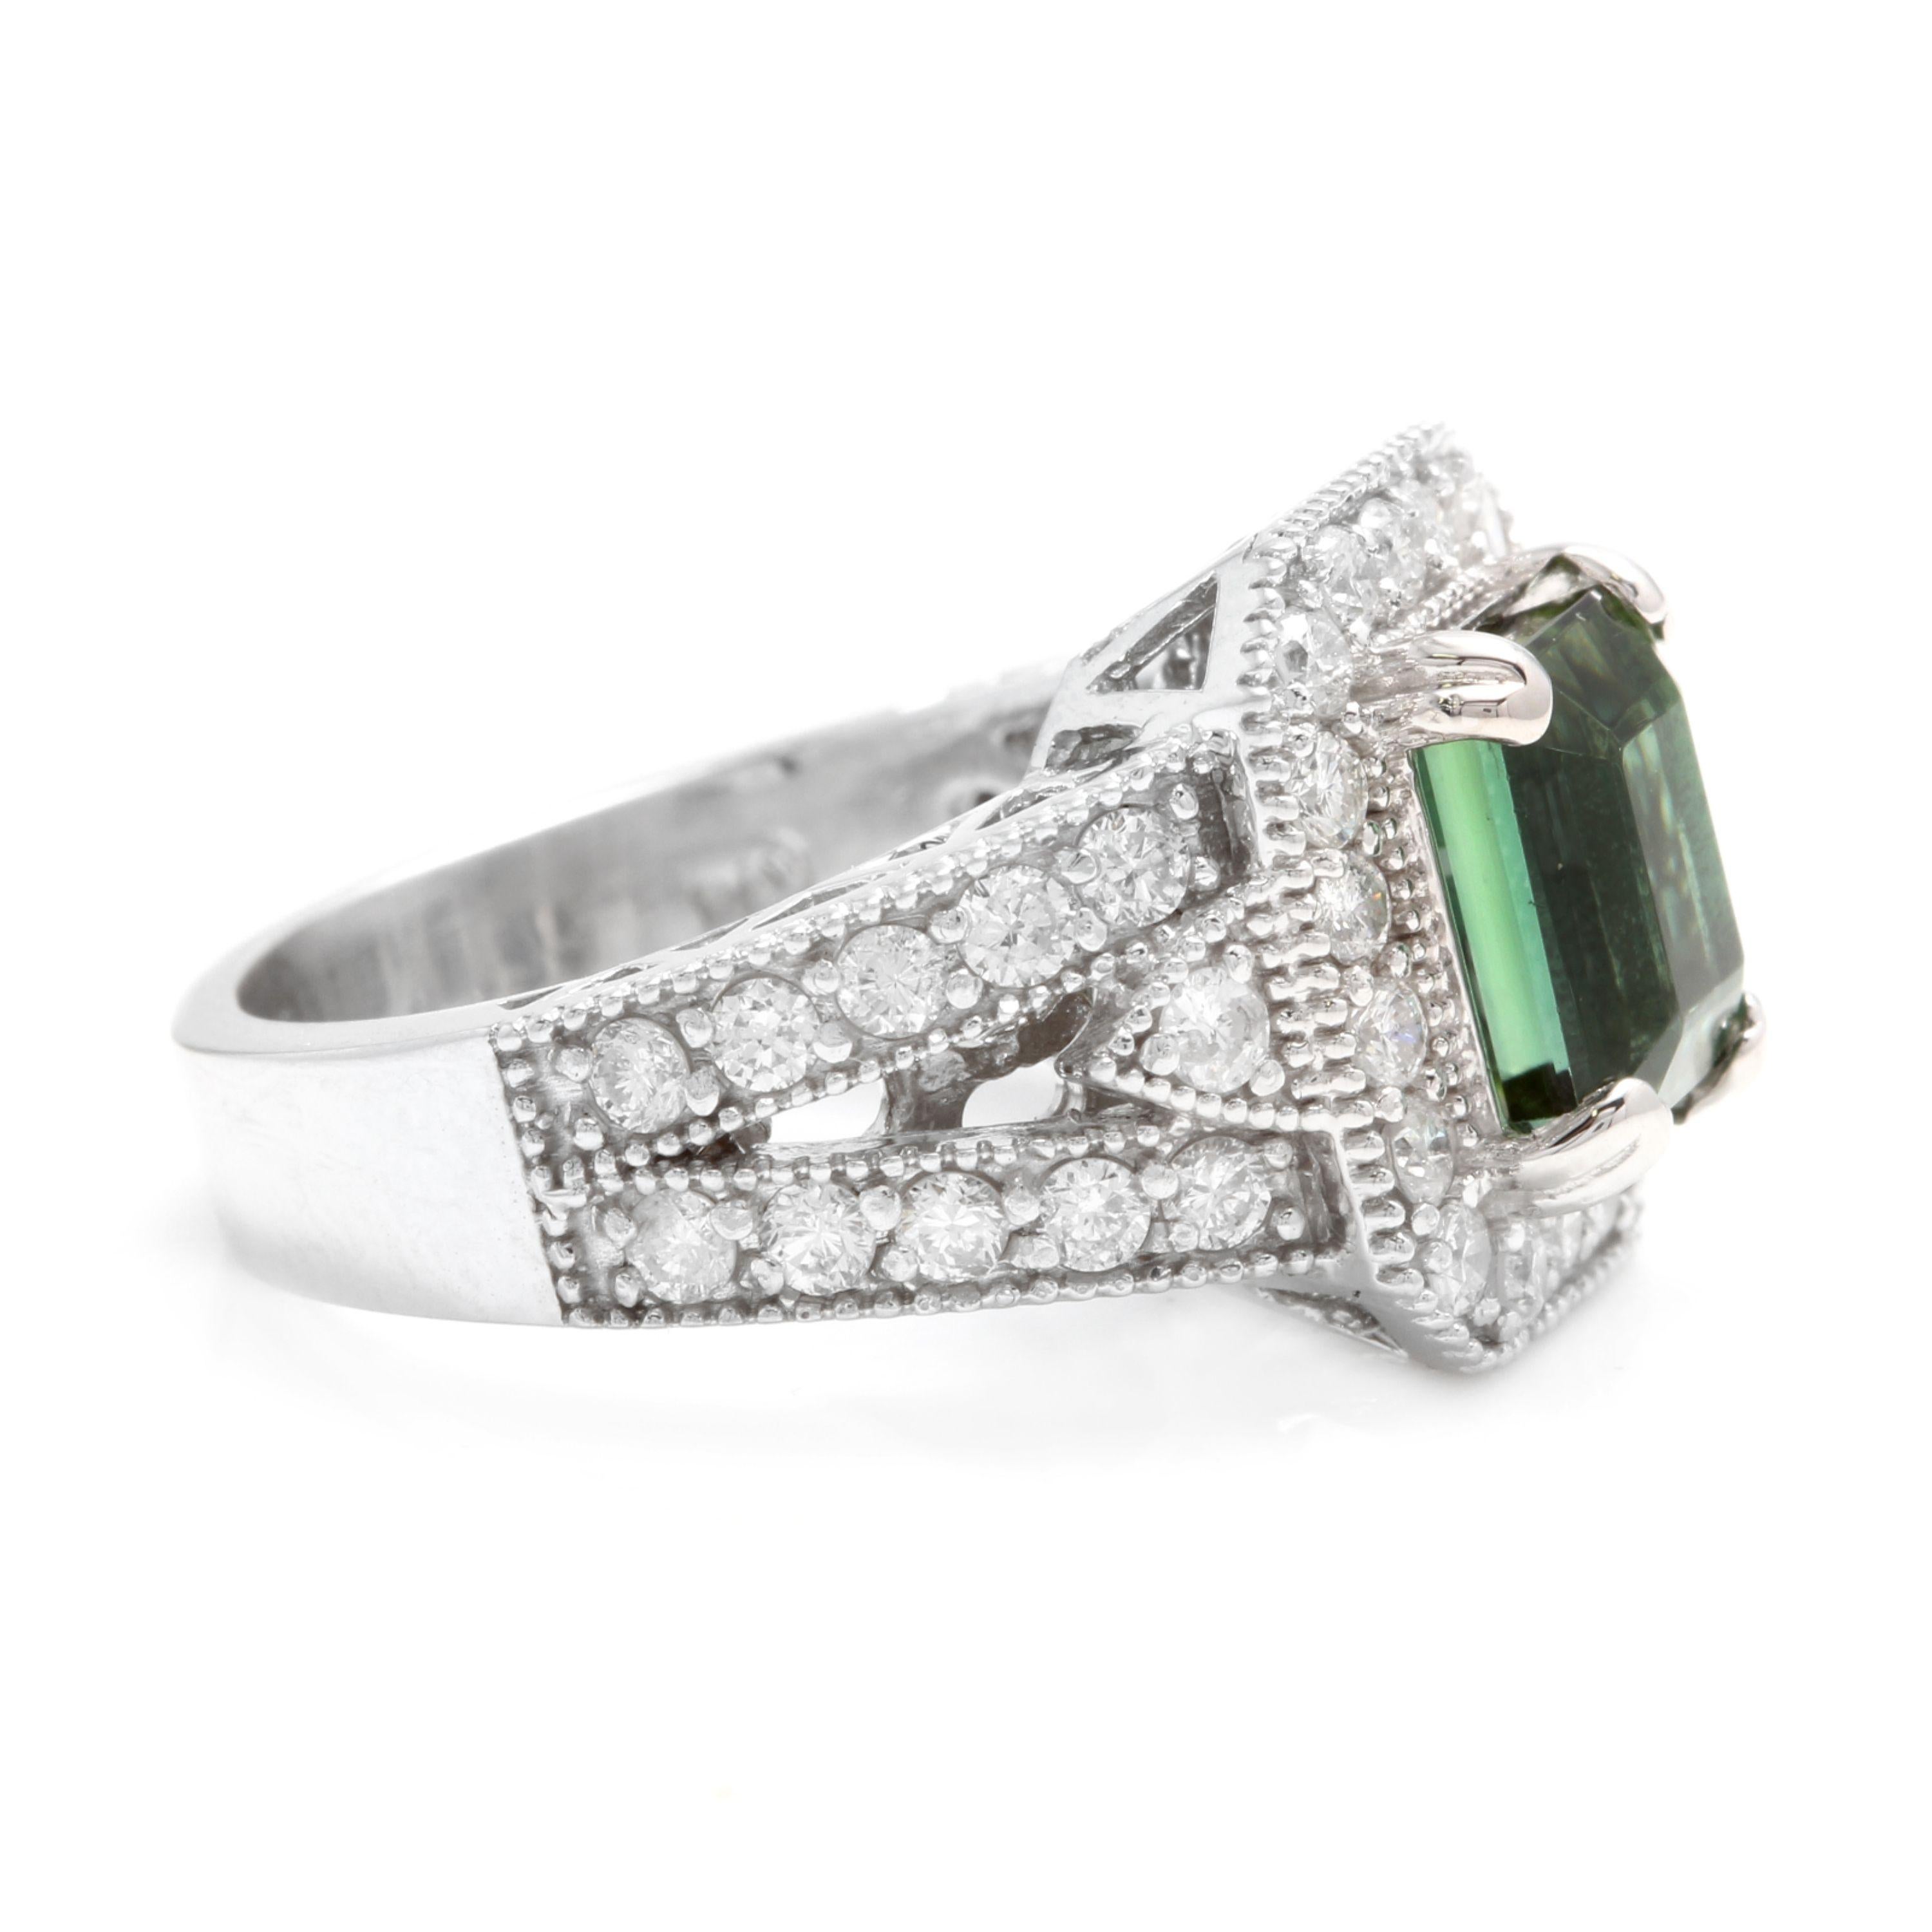 Mixed Cut 4.90 Carat Natural Green Tourmaline and Diamond 18 Karat Solid White Gold Ring For Sale